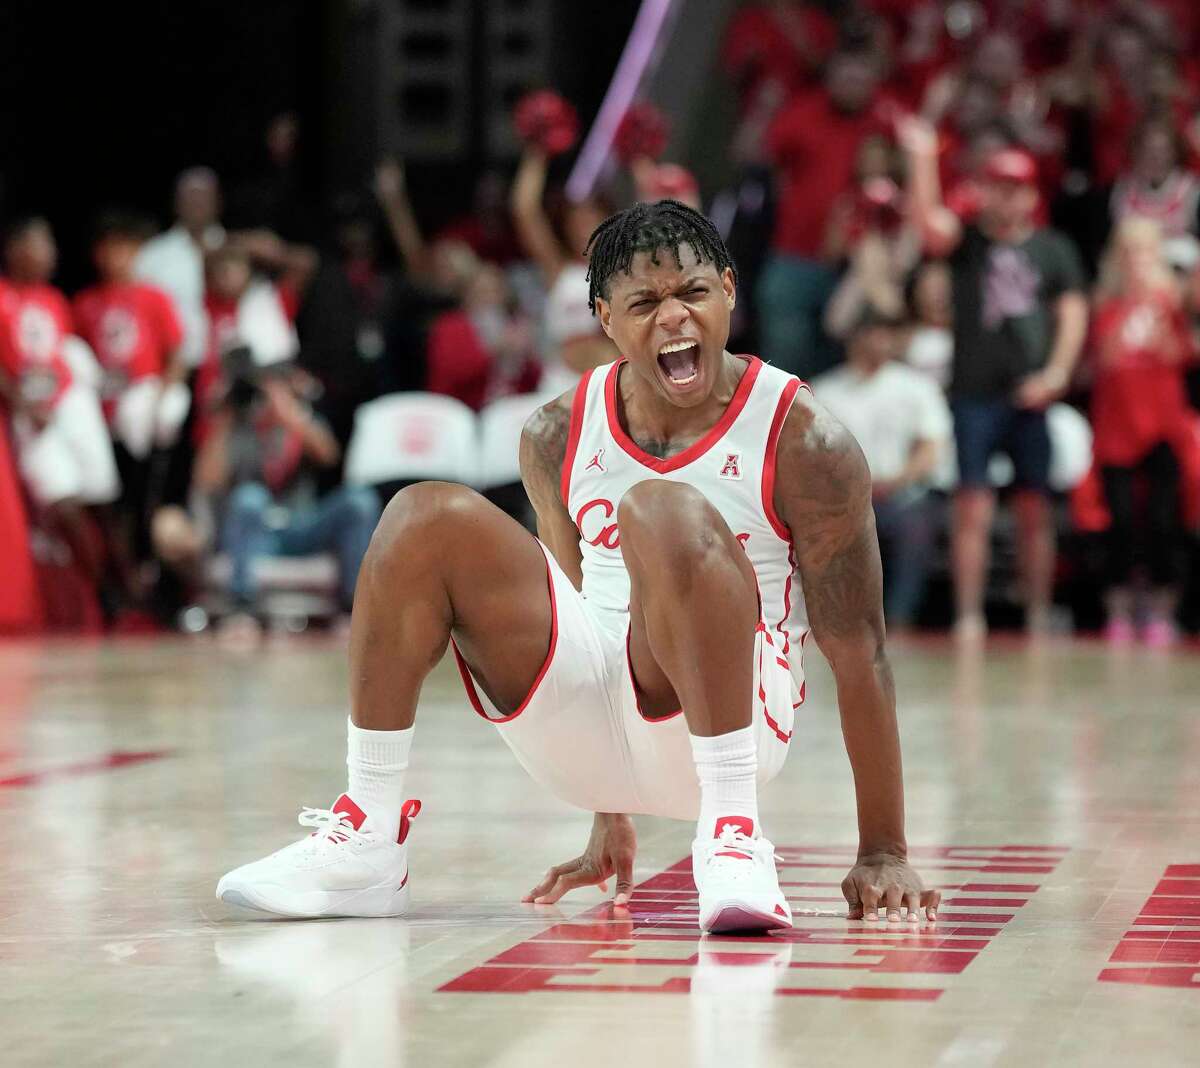 Houston Cougars guard Marcus Sasser (0) screams after he was fouled by South Florida Bulls guard Jamir Chaplin as he shot a three-pointer during the second half of a NCAA mens basketball game at the Fertitta Center on Wednesday, Jan. 11, 2023 in Houston. UH beat the South Florida Bulls 83-77.